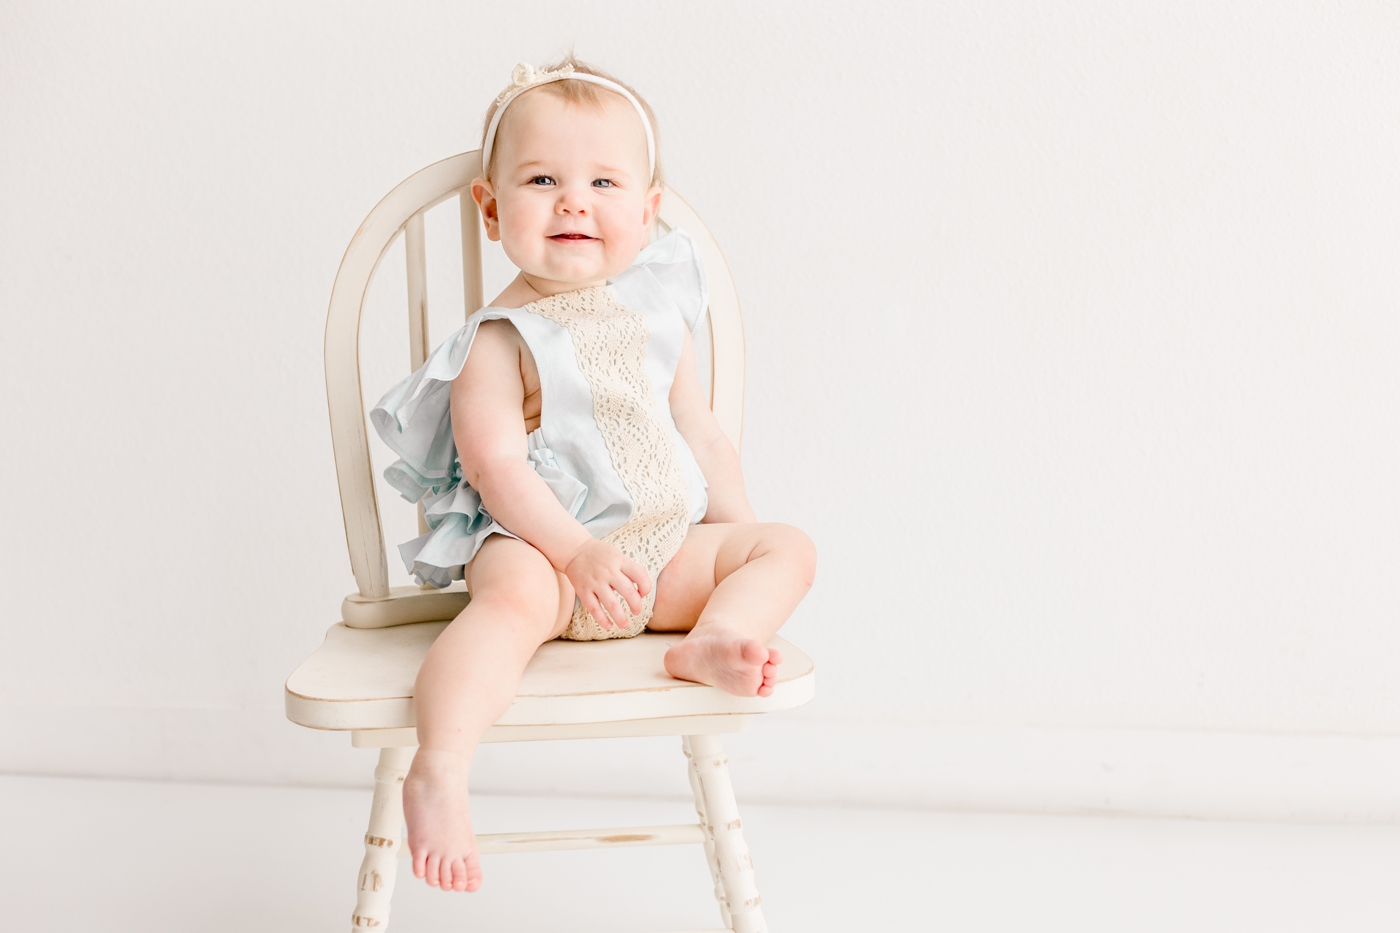 Smiling baby girl sitting on wooden chair during first birthday session in Austin, TX. Photo by Sana Ahmed Photography.